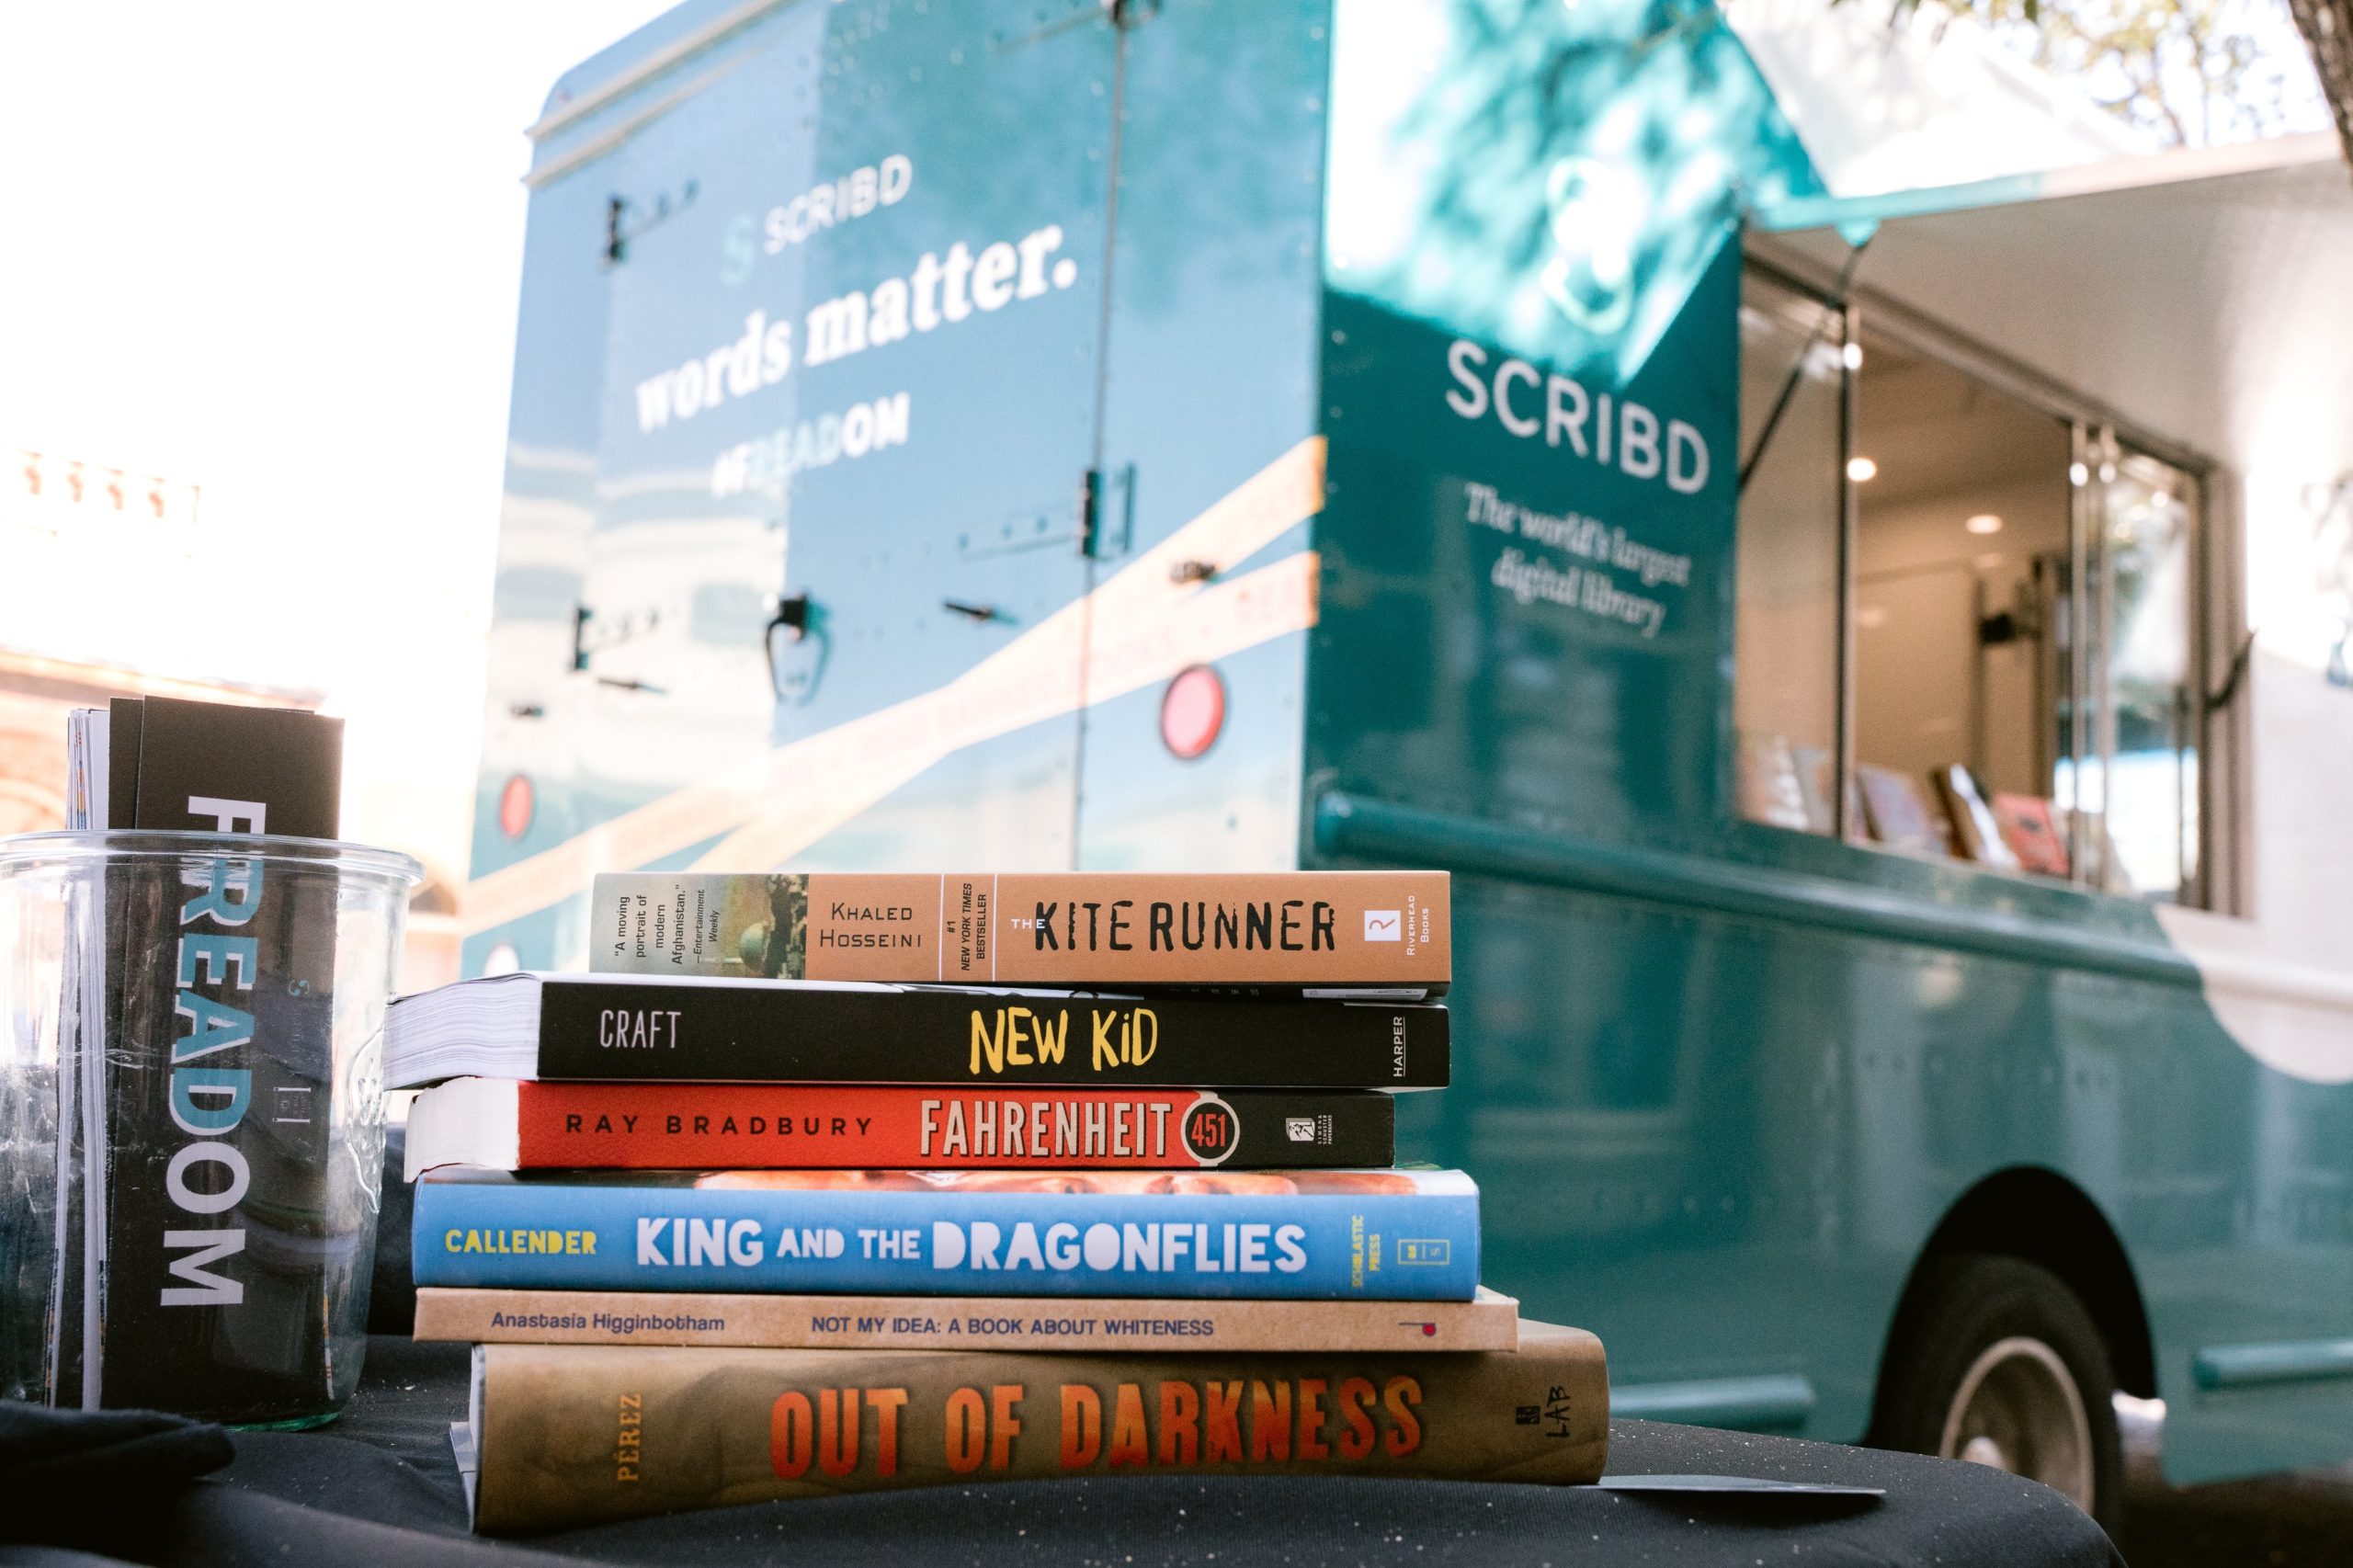 The Painted Porch Shares Free Books in Response to Districtwide Bans